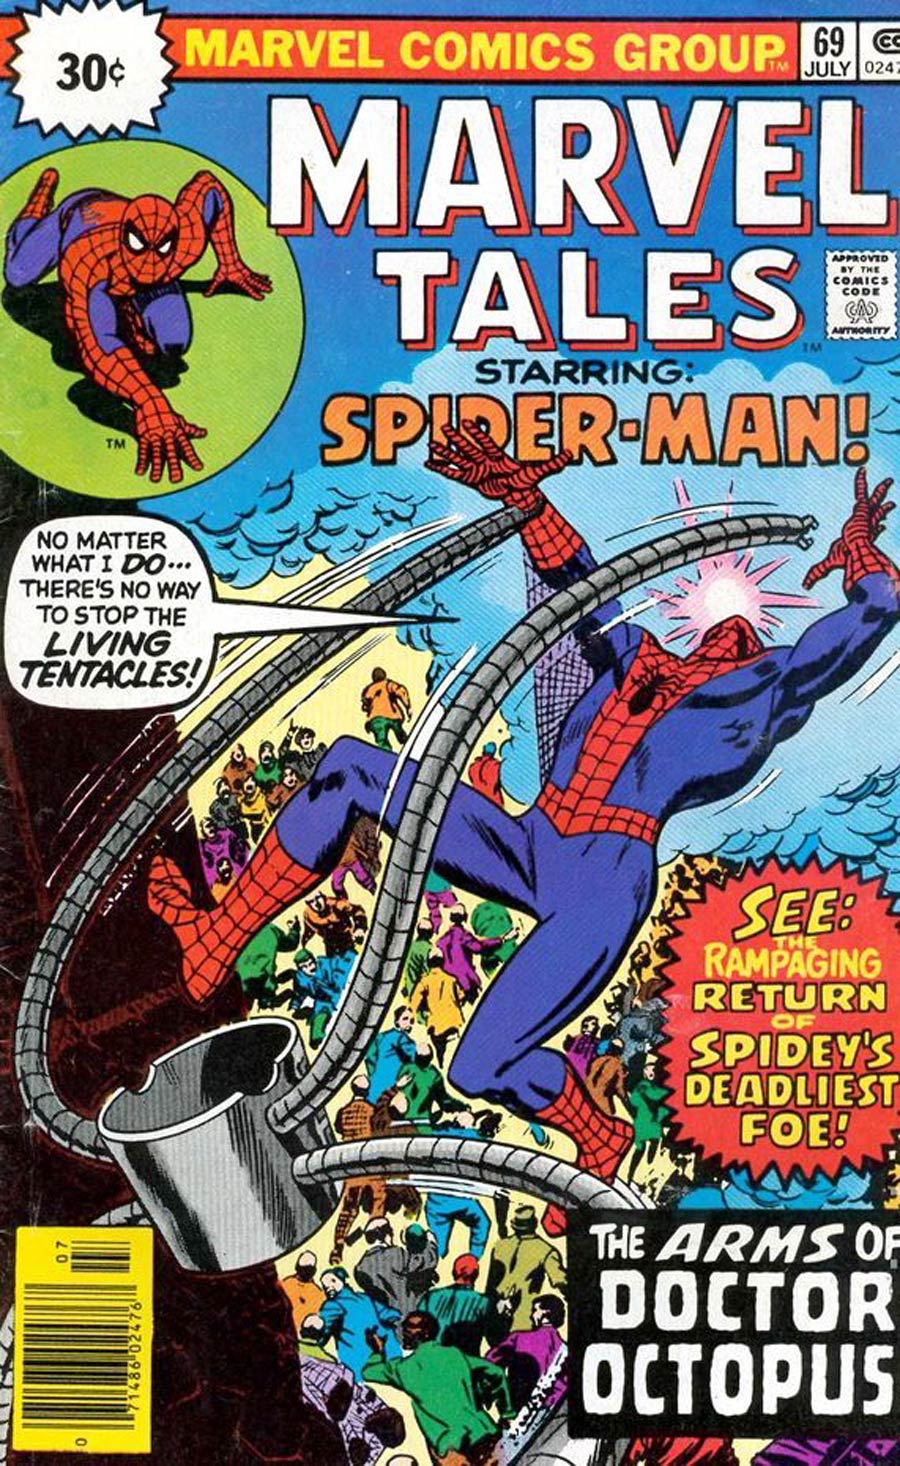 Marvel Tales #69 Cover B 30-Cent Variant Cover